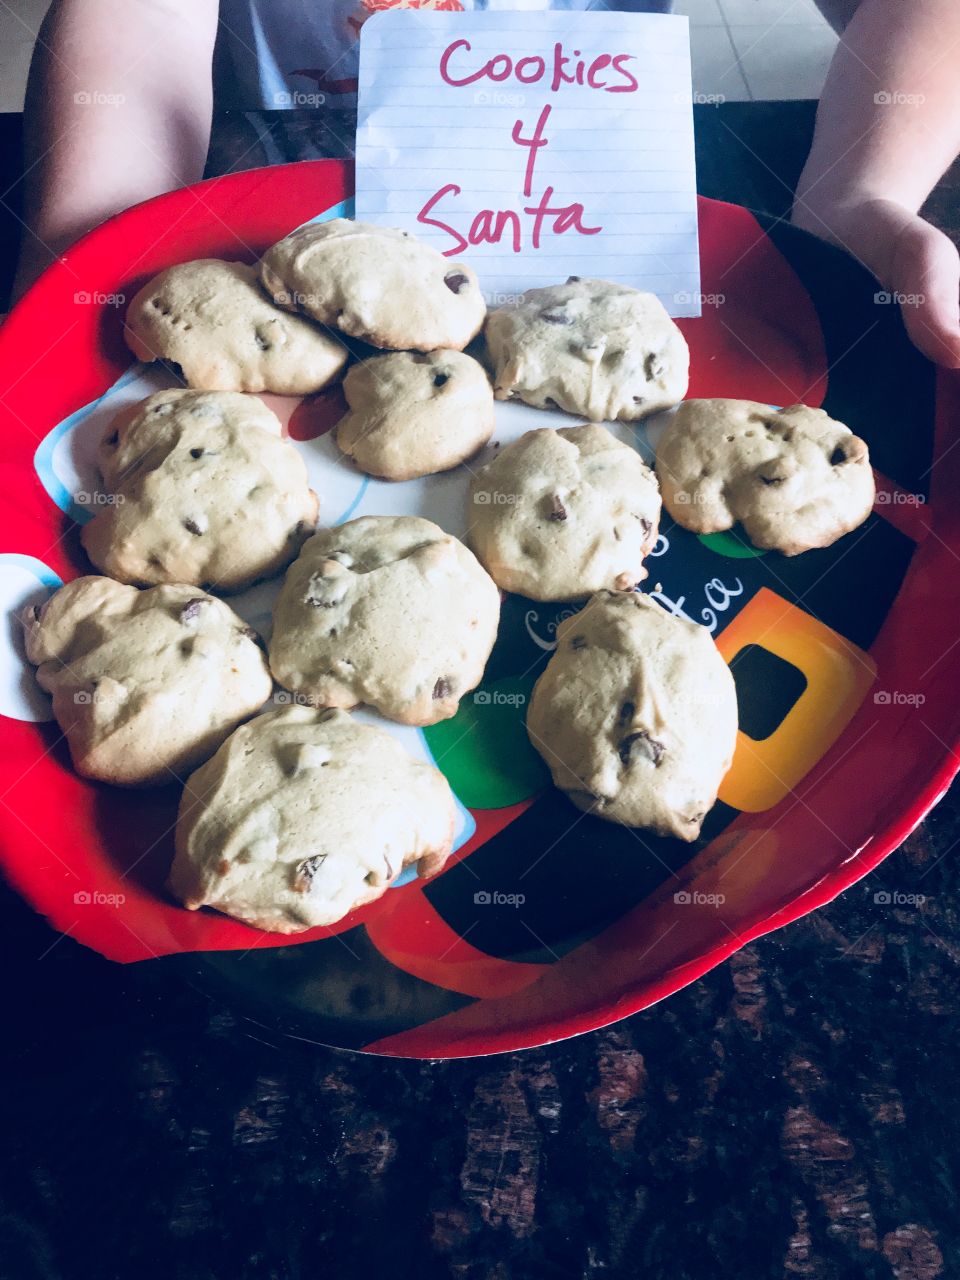 Cookies for Santa, A plate full of delicious chocolate chip cookies on a Christmas Santa Clause plate.  Child holding a plate of Cookies for Santa.